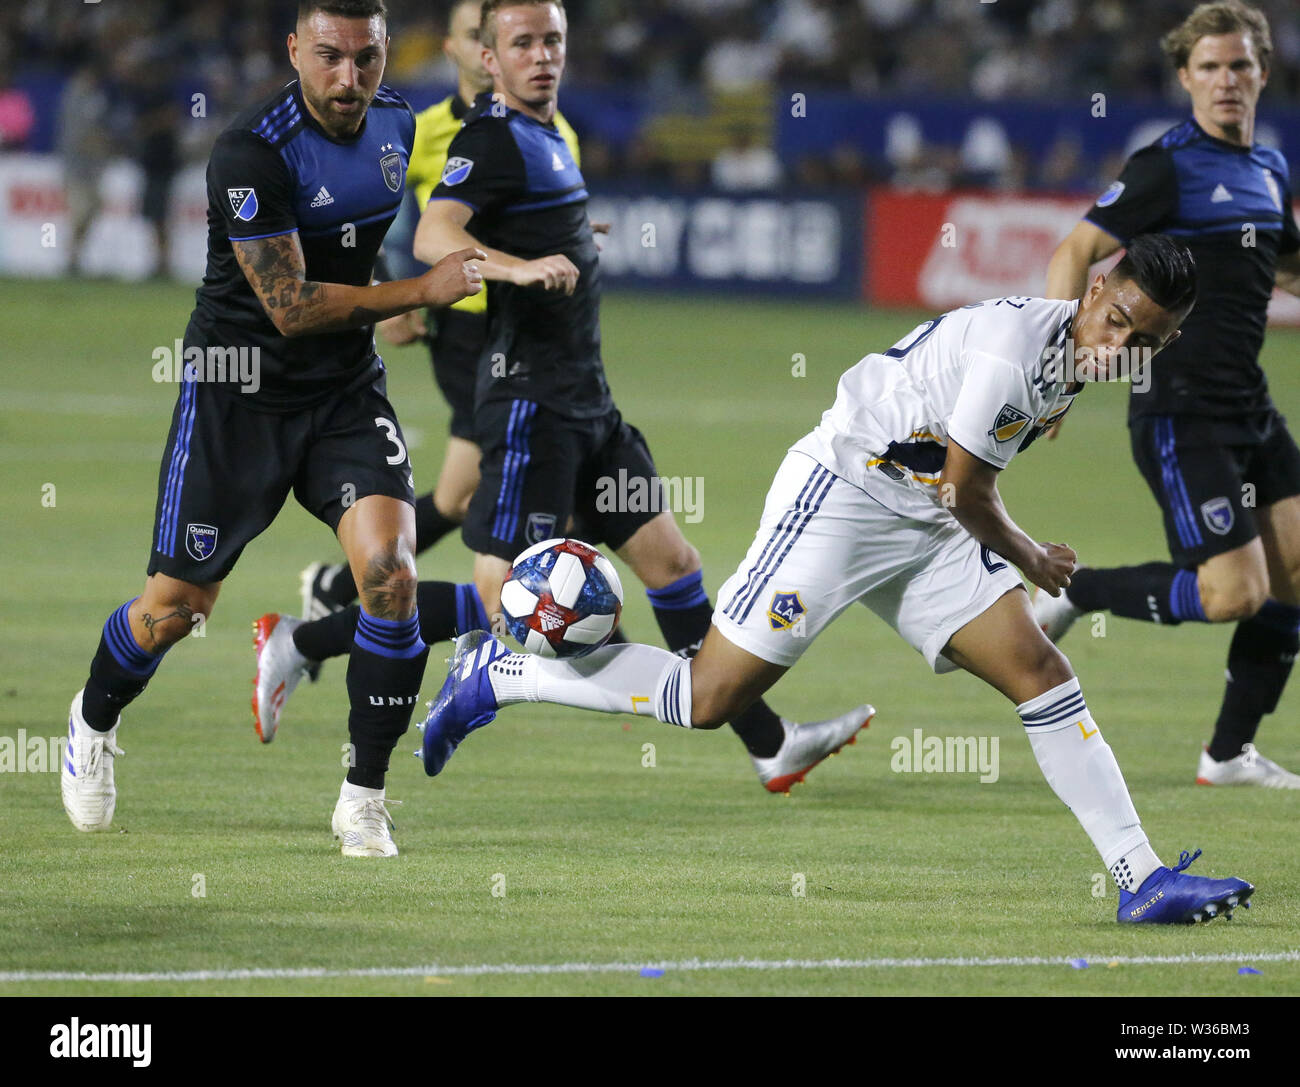 Los Angeles, California, USA. 12th July, 2019. LA Galaxy defender Giancarlo Gonzalez (21) tries to control the ball defended by San Jose Earthquakes defender Guram Kashia (37) during the 2019 Major League Soccer (MLS) match between LA Galaxy and San Jose Earthquakes in Carson, California, July 12, 2019. The Earthquakes won 3-1. Credit: Ringo Chiu/ZUMA Wire/Alamy Live News Stock Photo